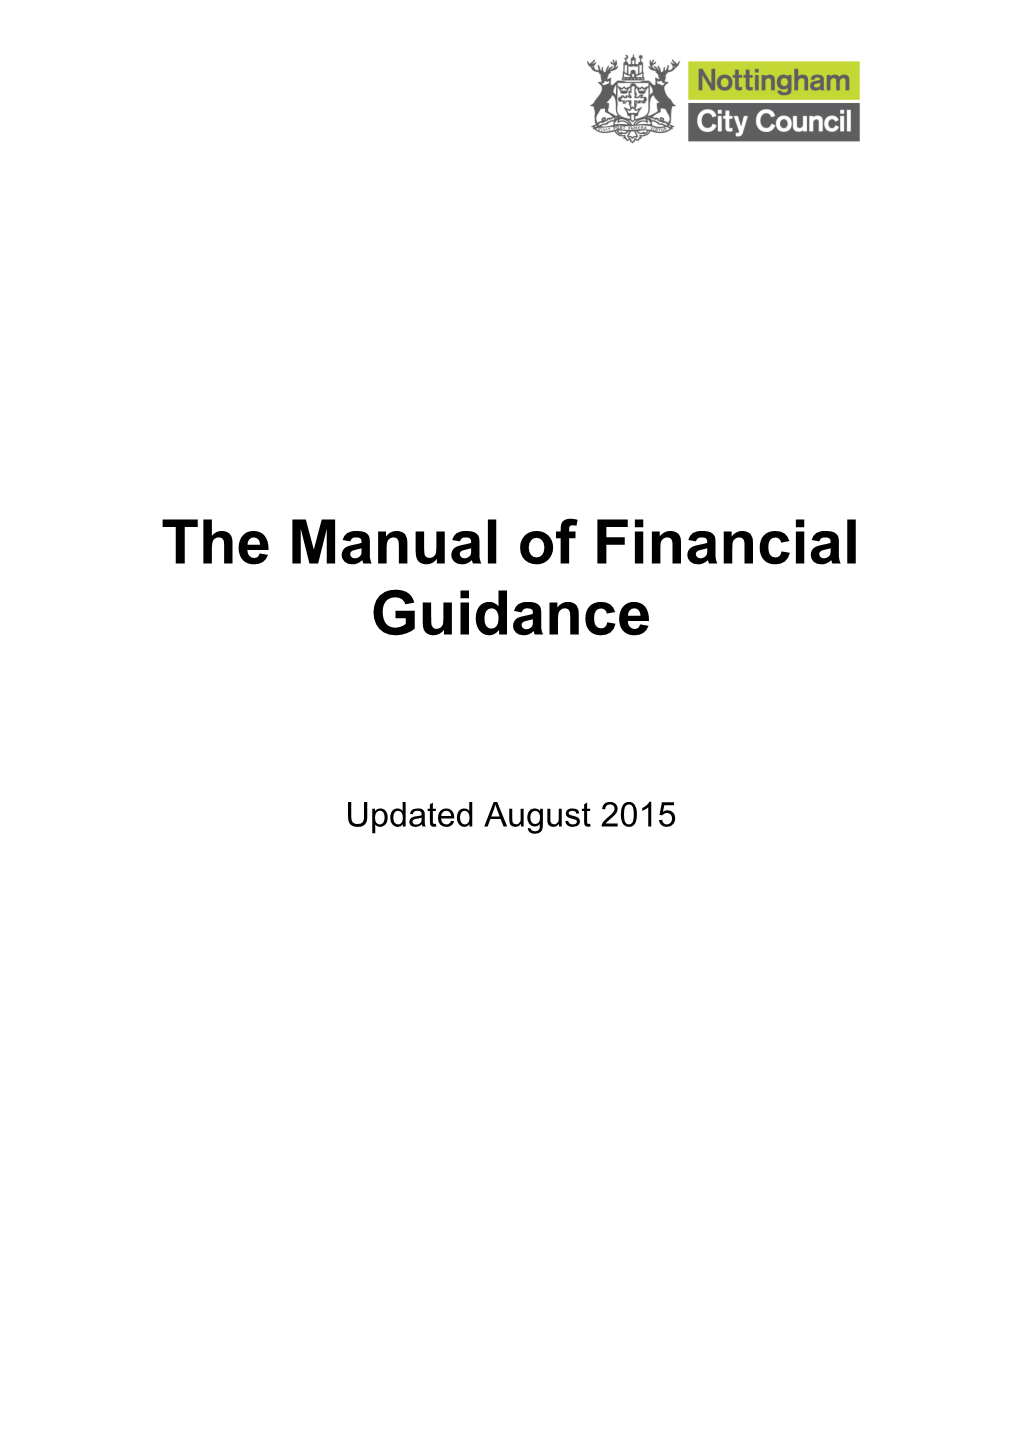 The Manual of Financial Guidance